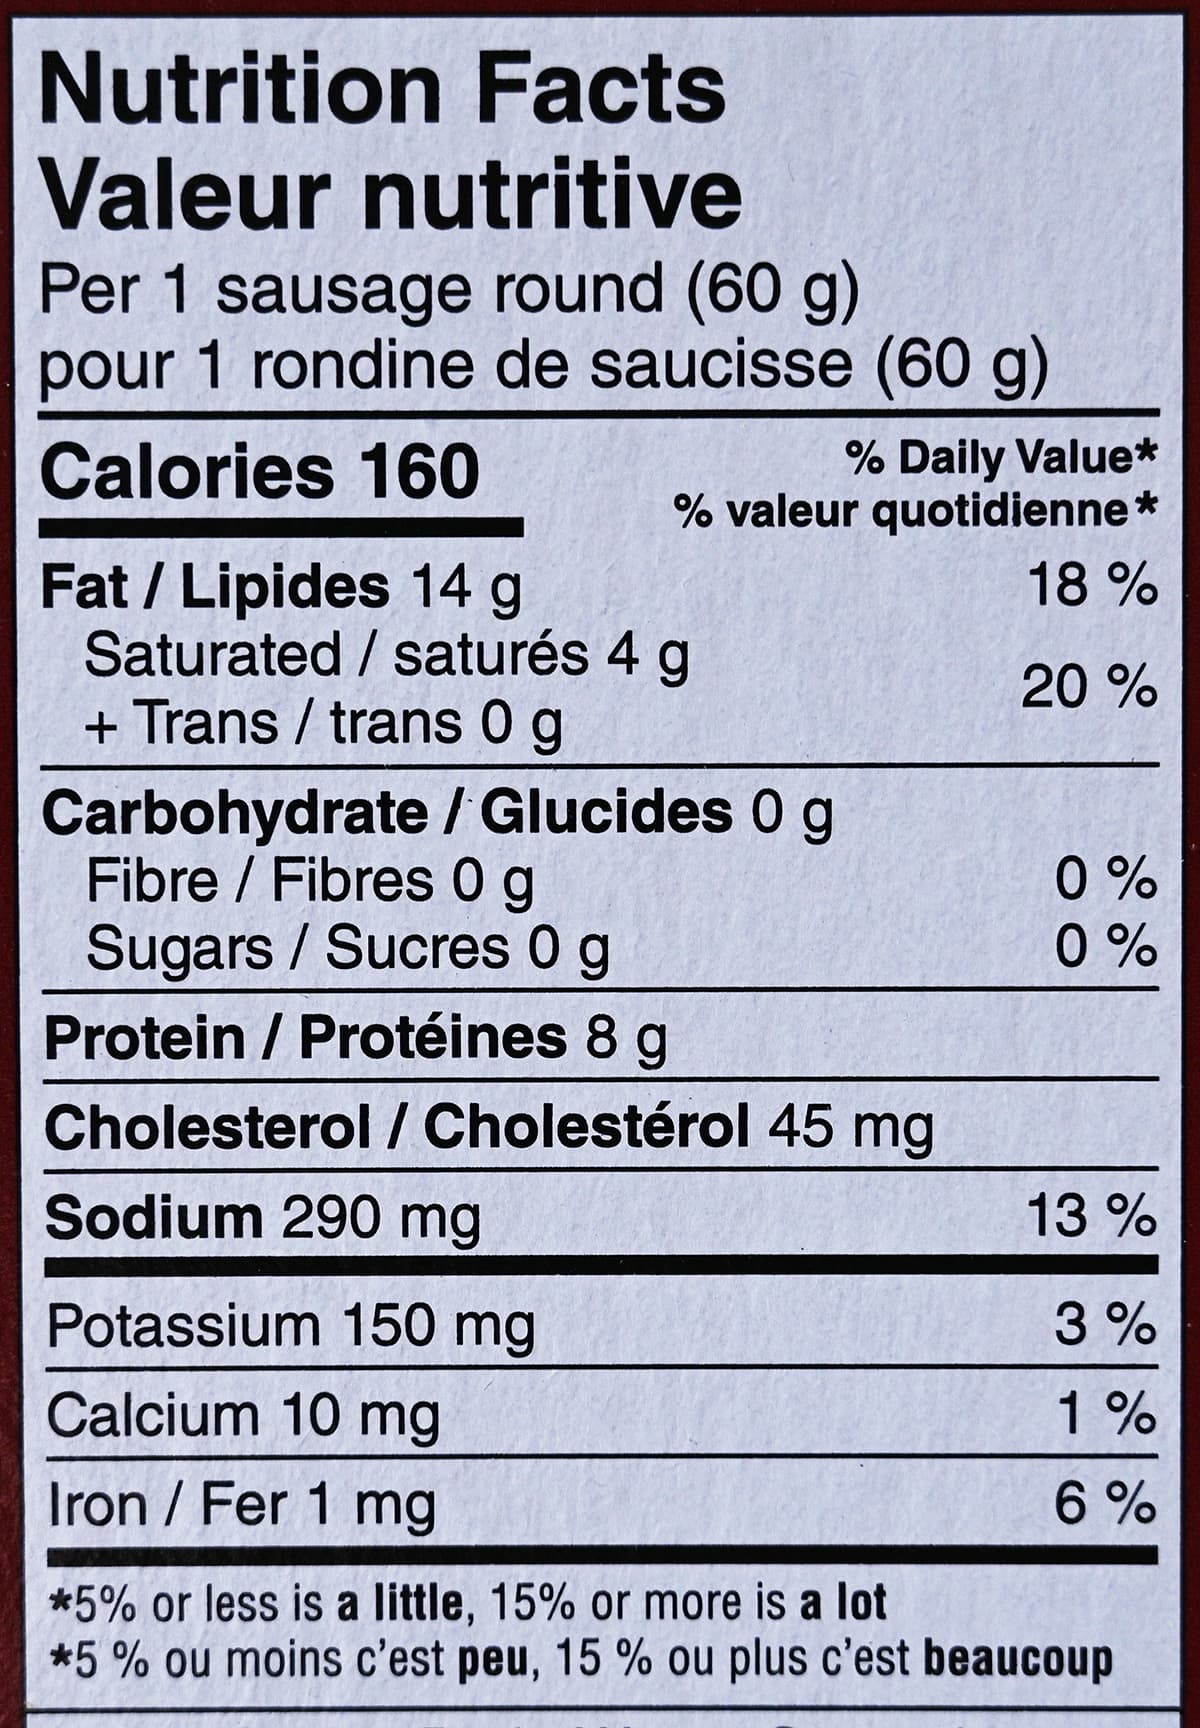 Image of the nutrition facts for the sausage rounds from the back of the box.